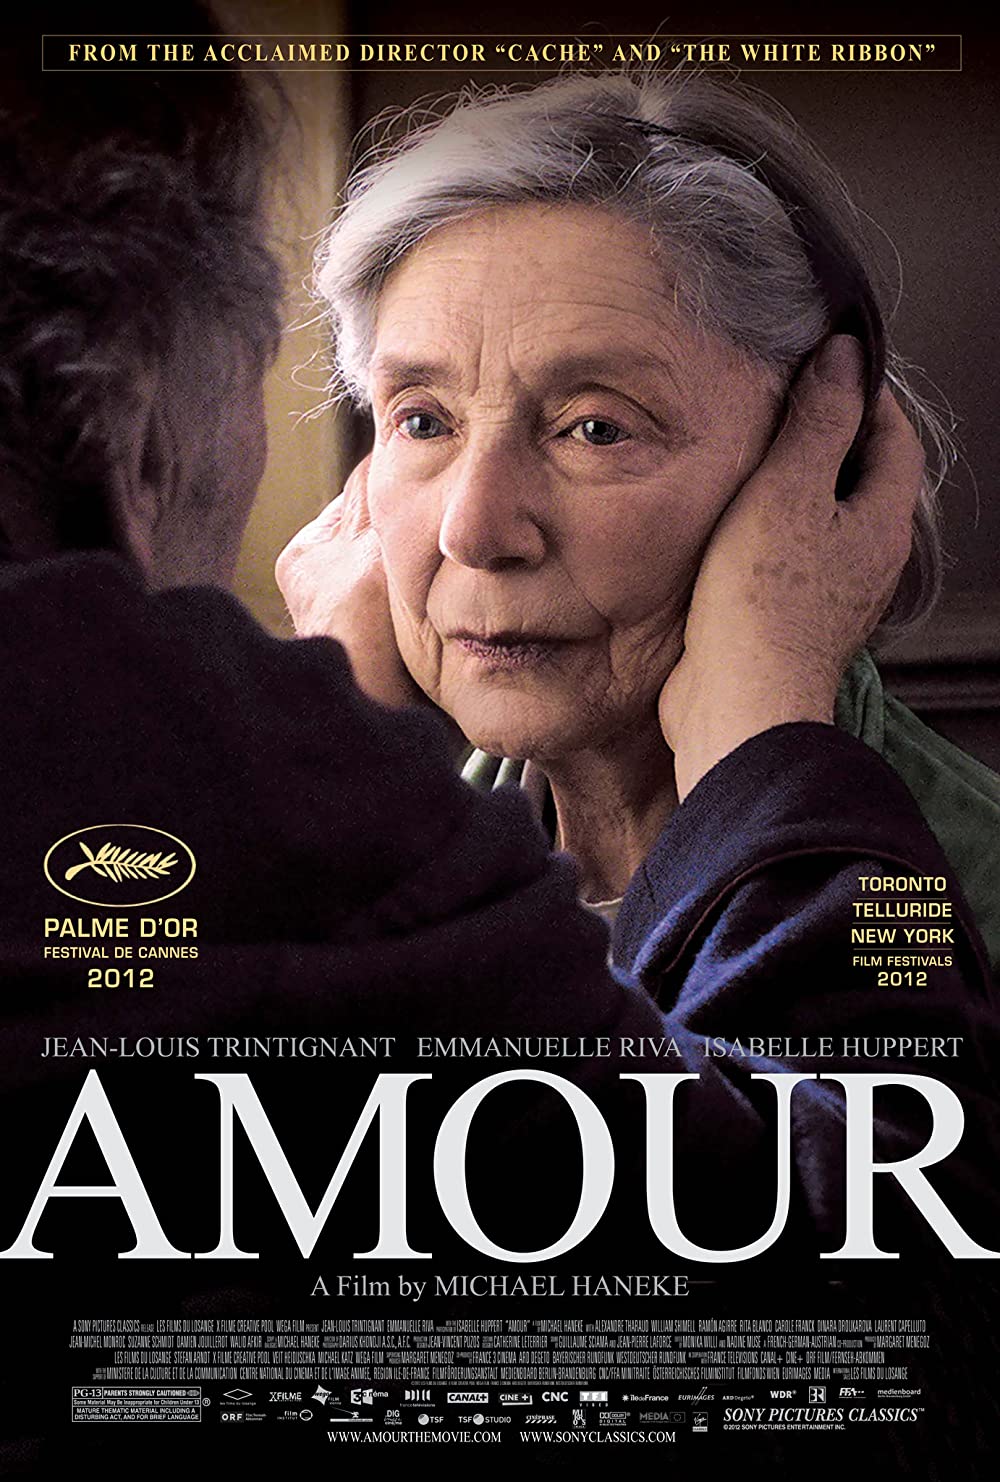 Louis L'Amour at the Movies - INSP TV